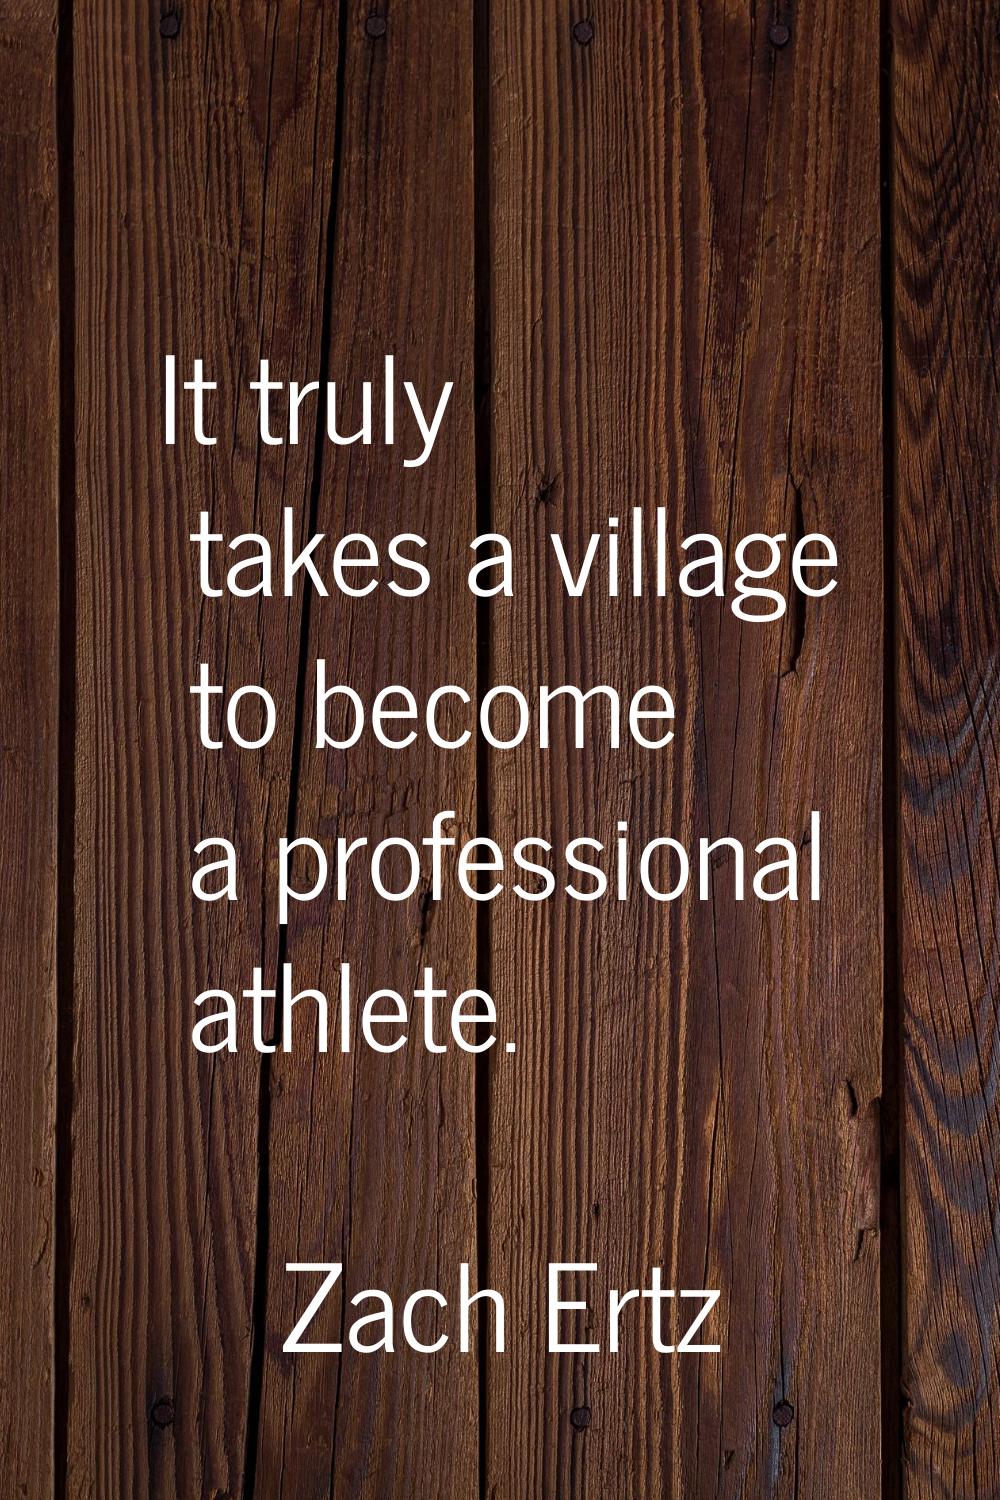 It truly takes a village to become a professional athlete.